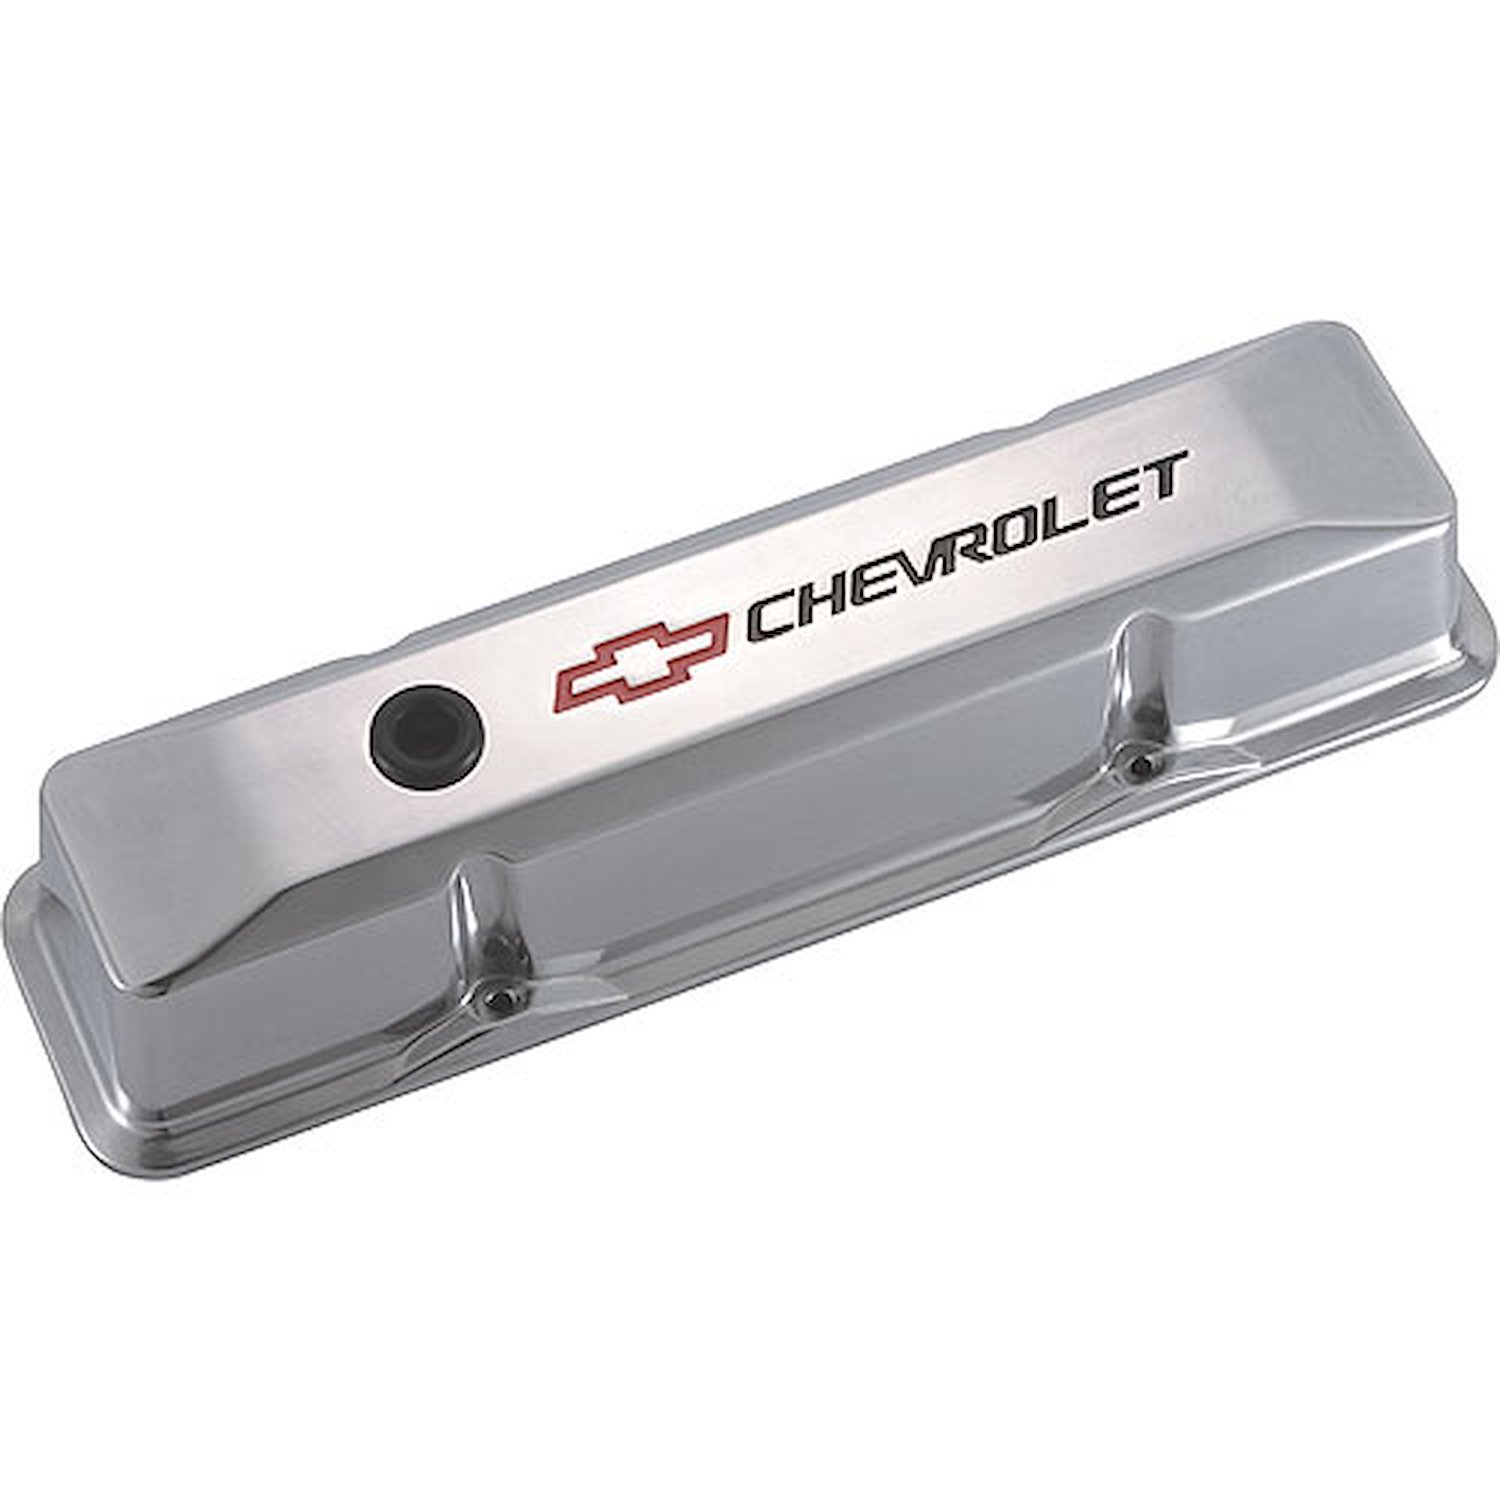 Die-Cast Aluminum Tall Valve Covers for 1958-1986 Small Block Chevy with Chevrolet/Bowtie Recessed Emblem in Polished Finish